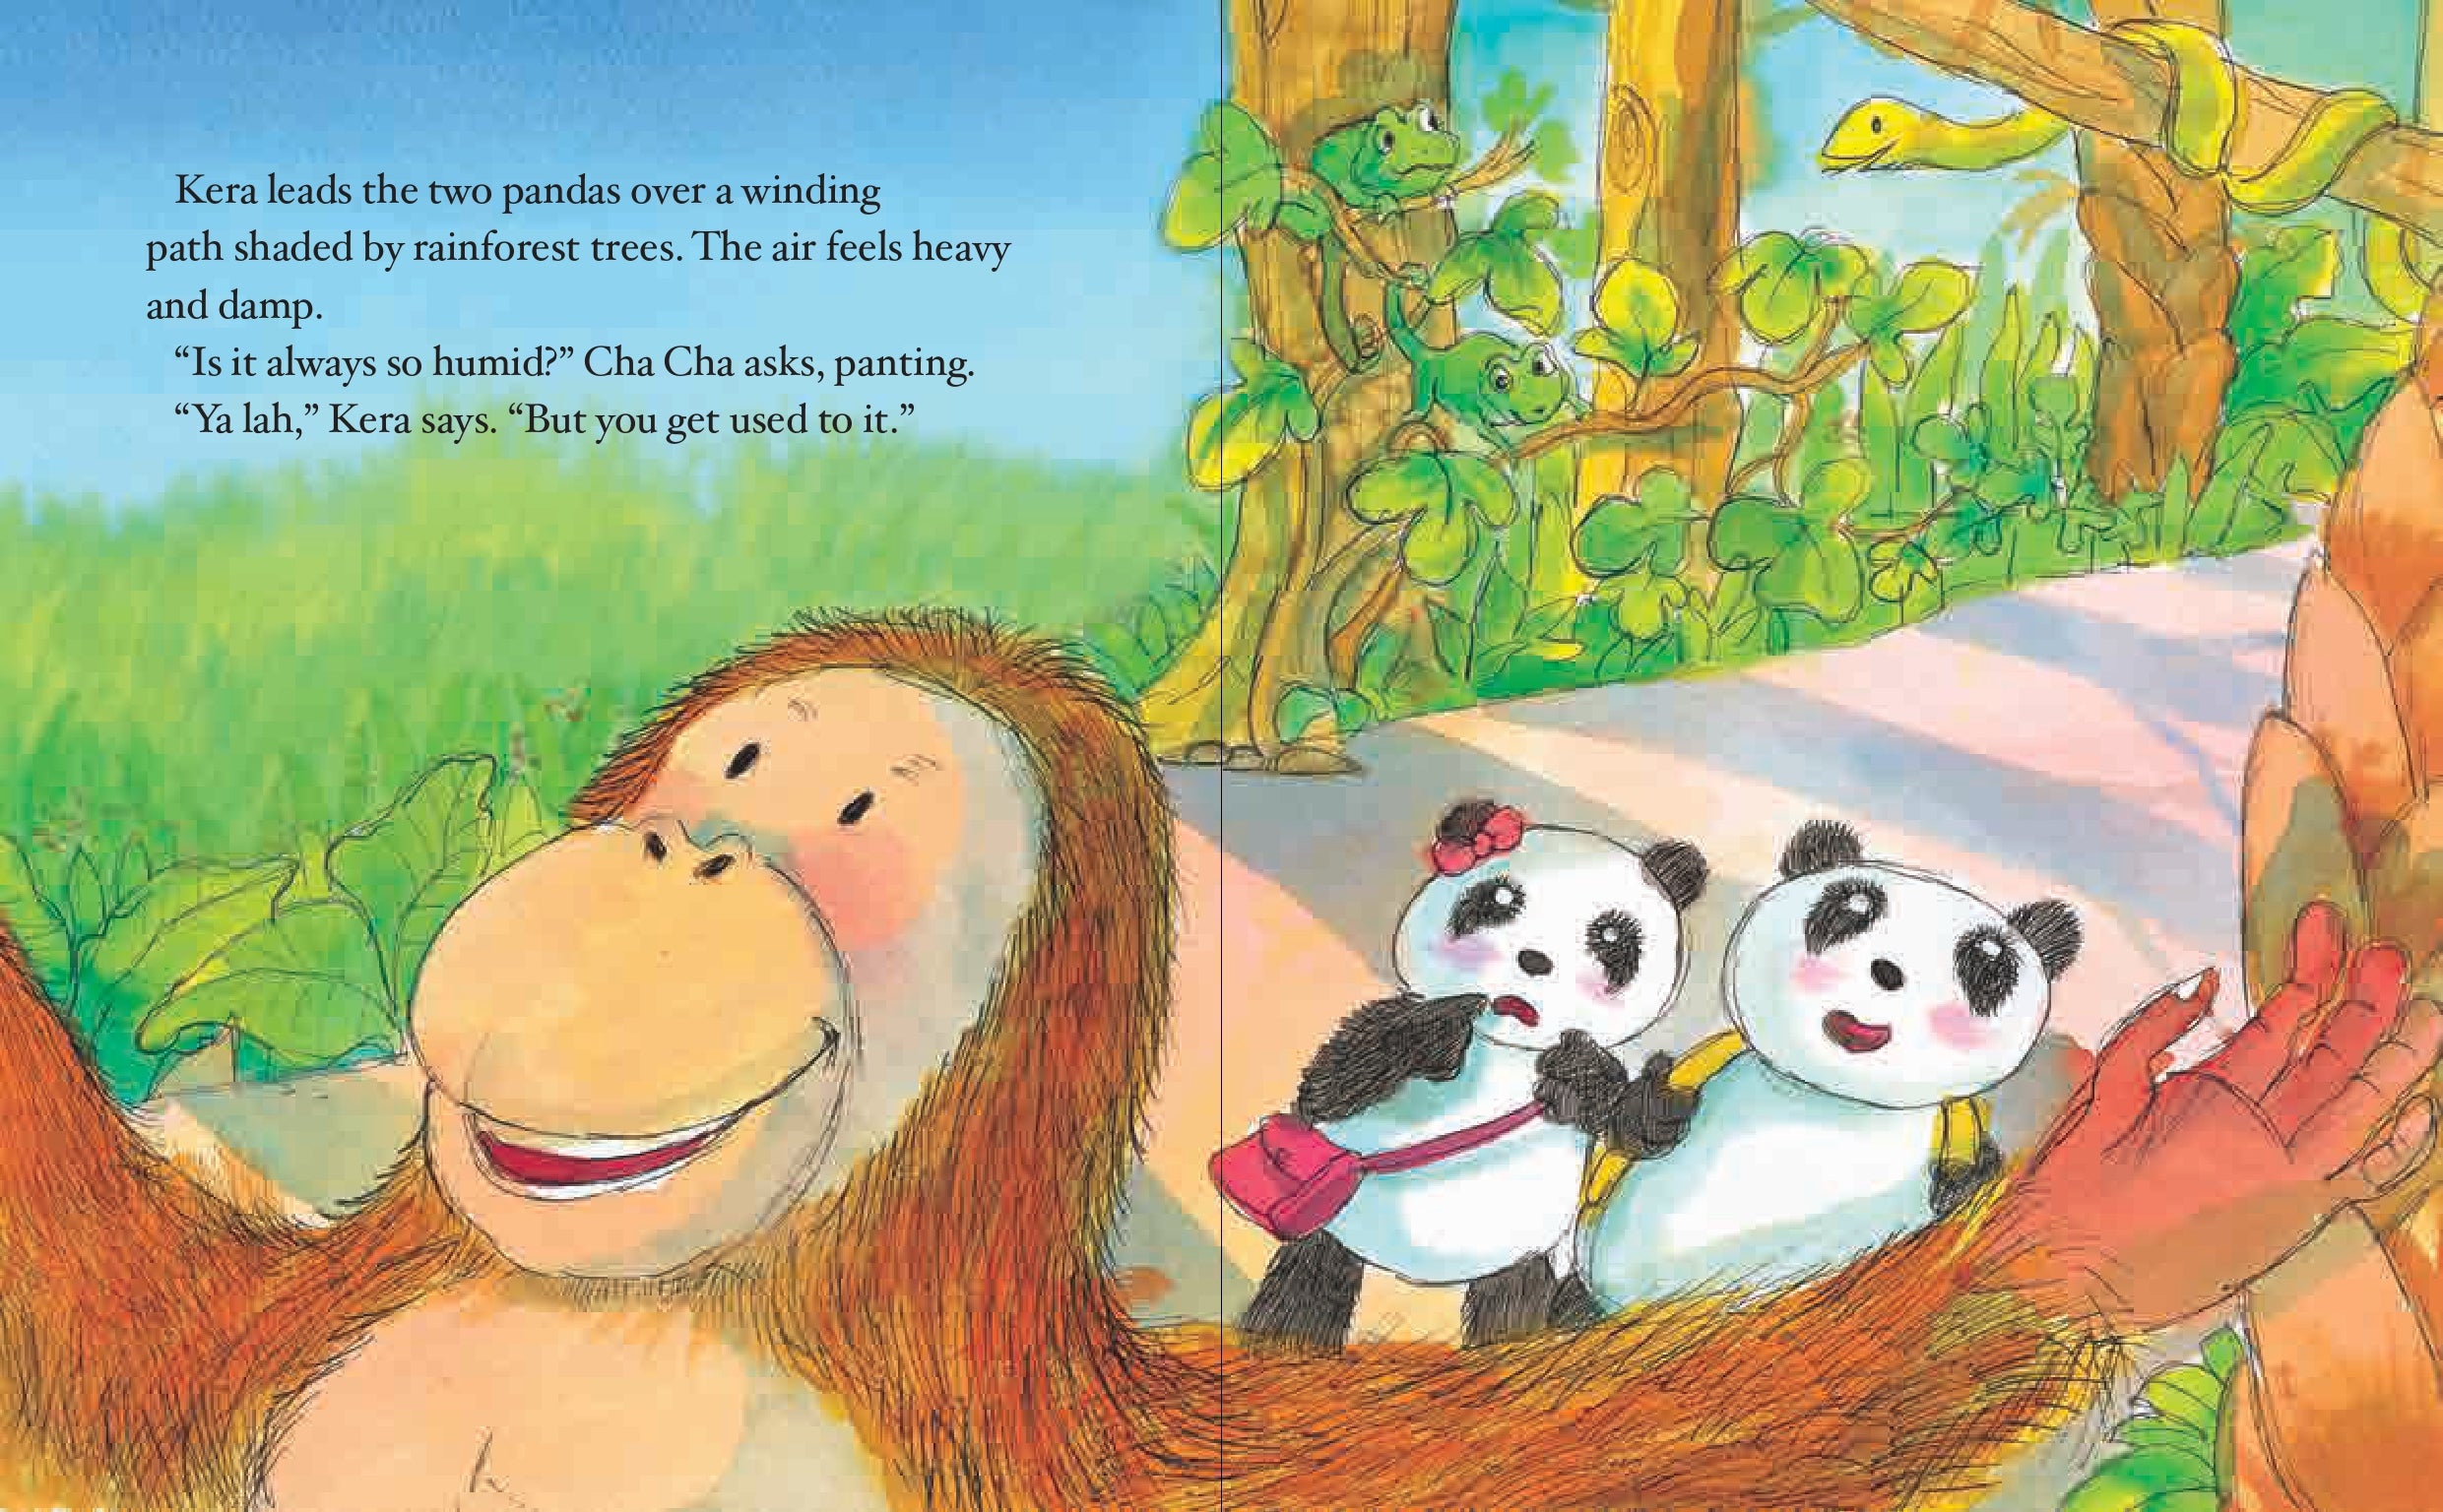 A New Home for Bo Bo and Cha Cha (Book 1)